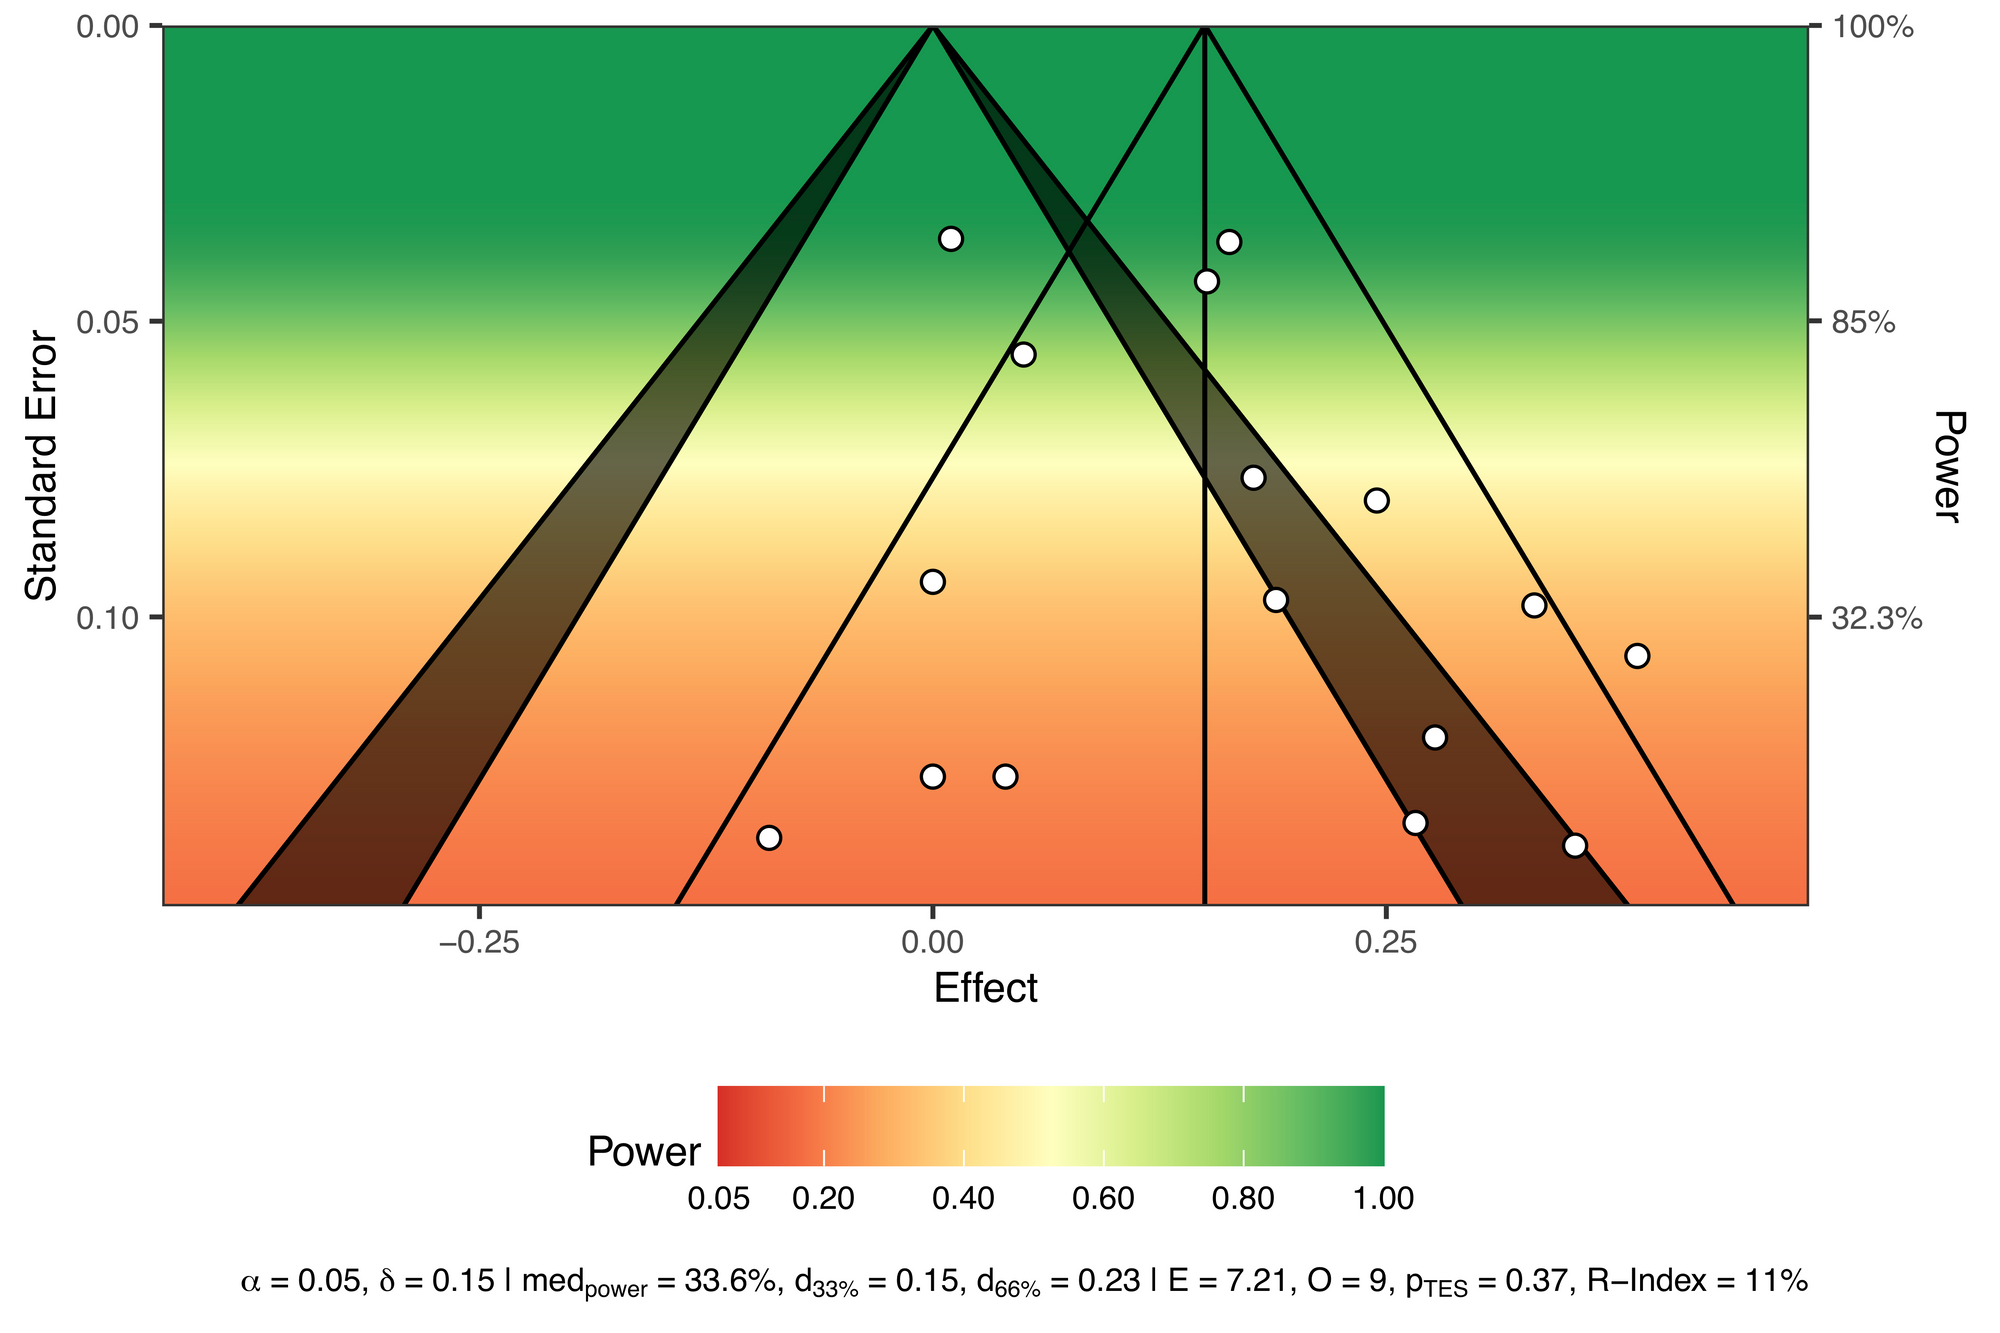 How to visualise the power of each effect in a meta-analysis